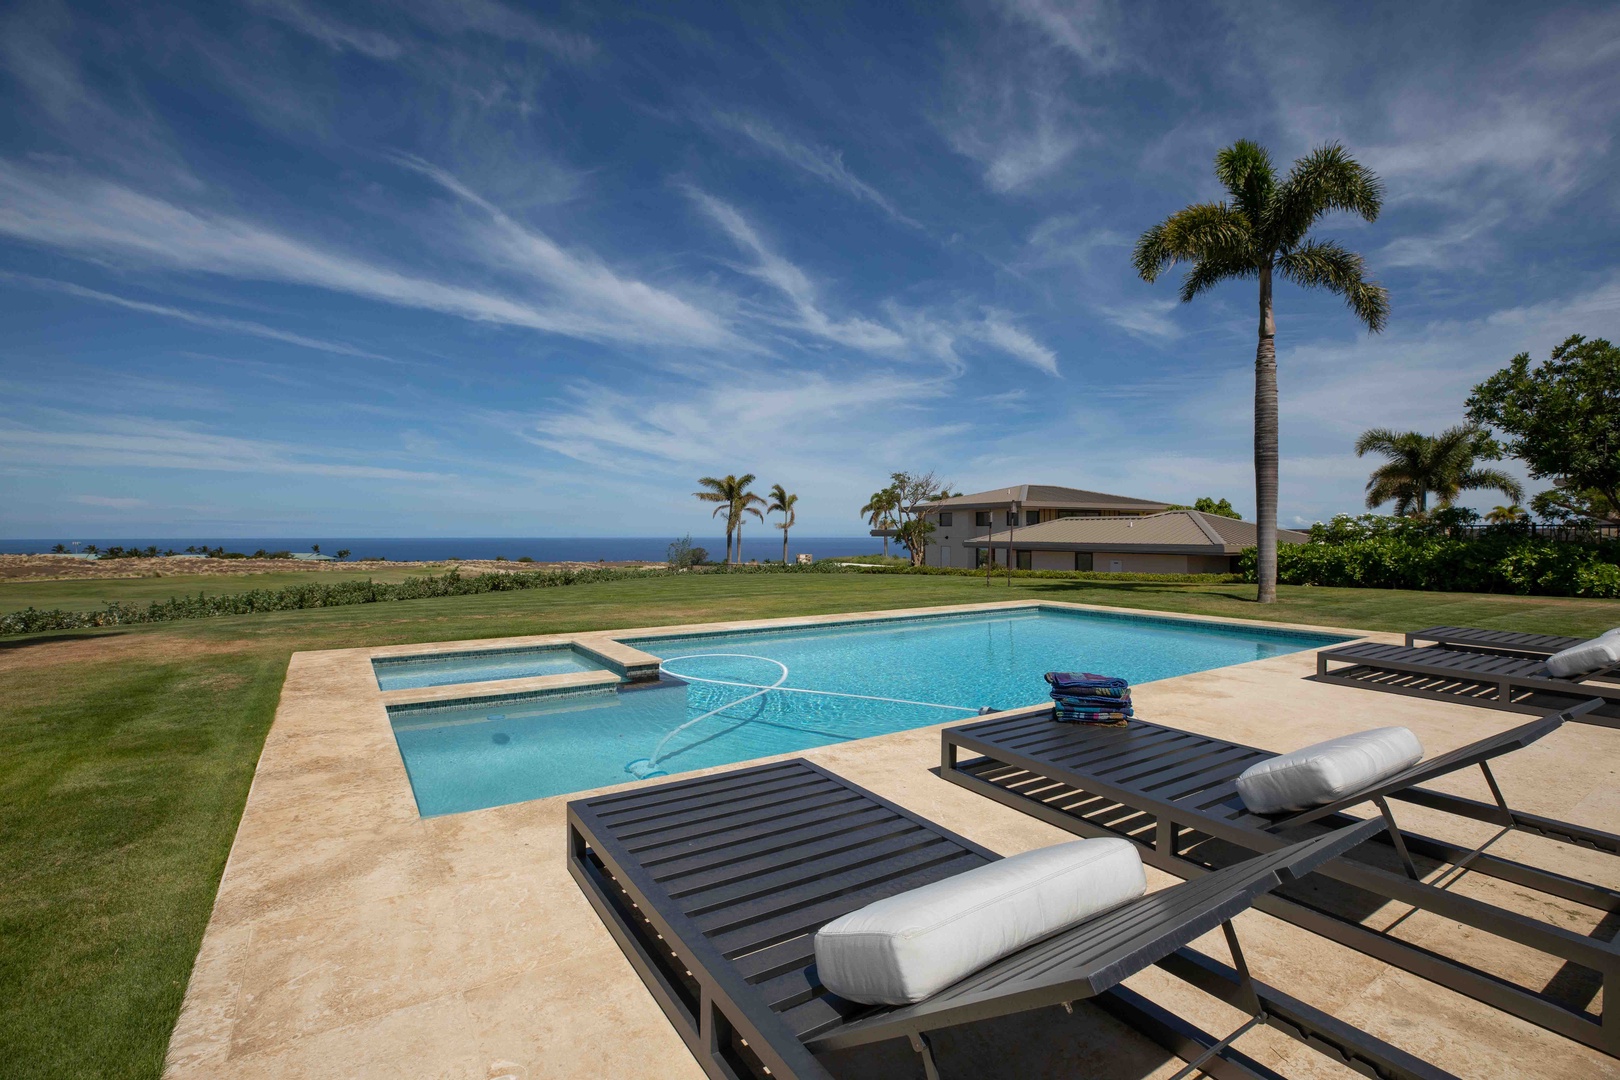 Kamuela Vacation Rentals, Hapuna Estates #8 - The views of the ocean, swaying palm trees and blue sky await you poolside